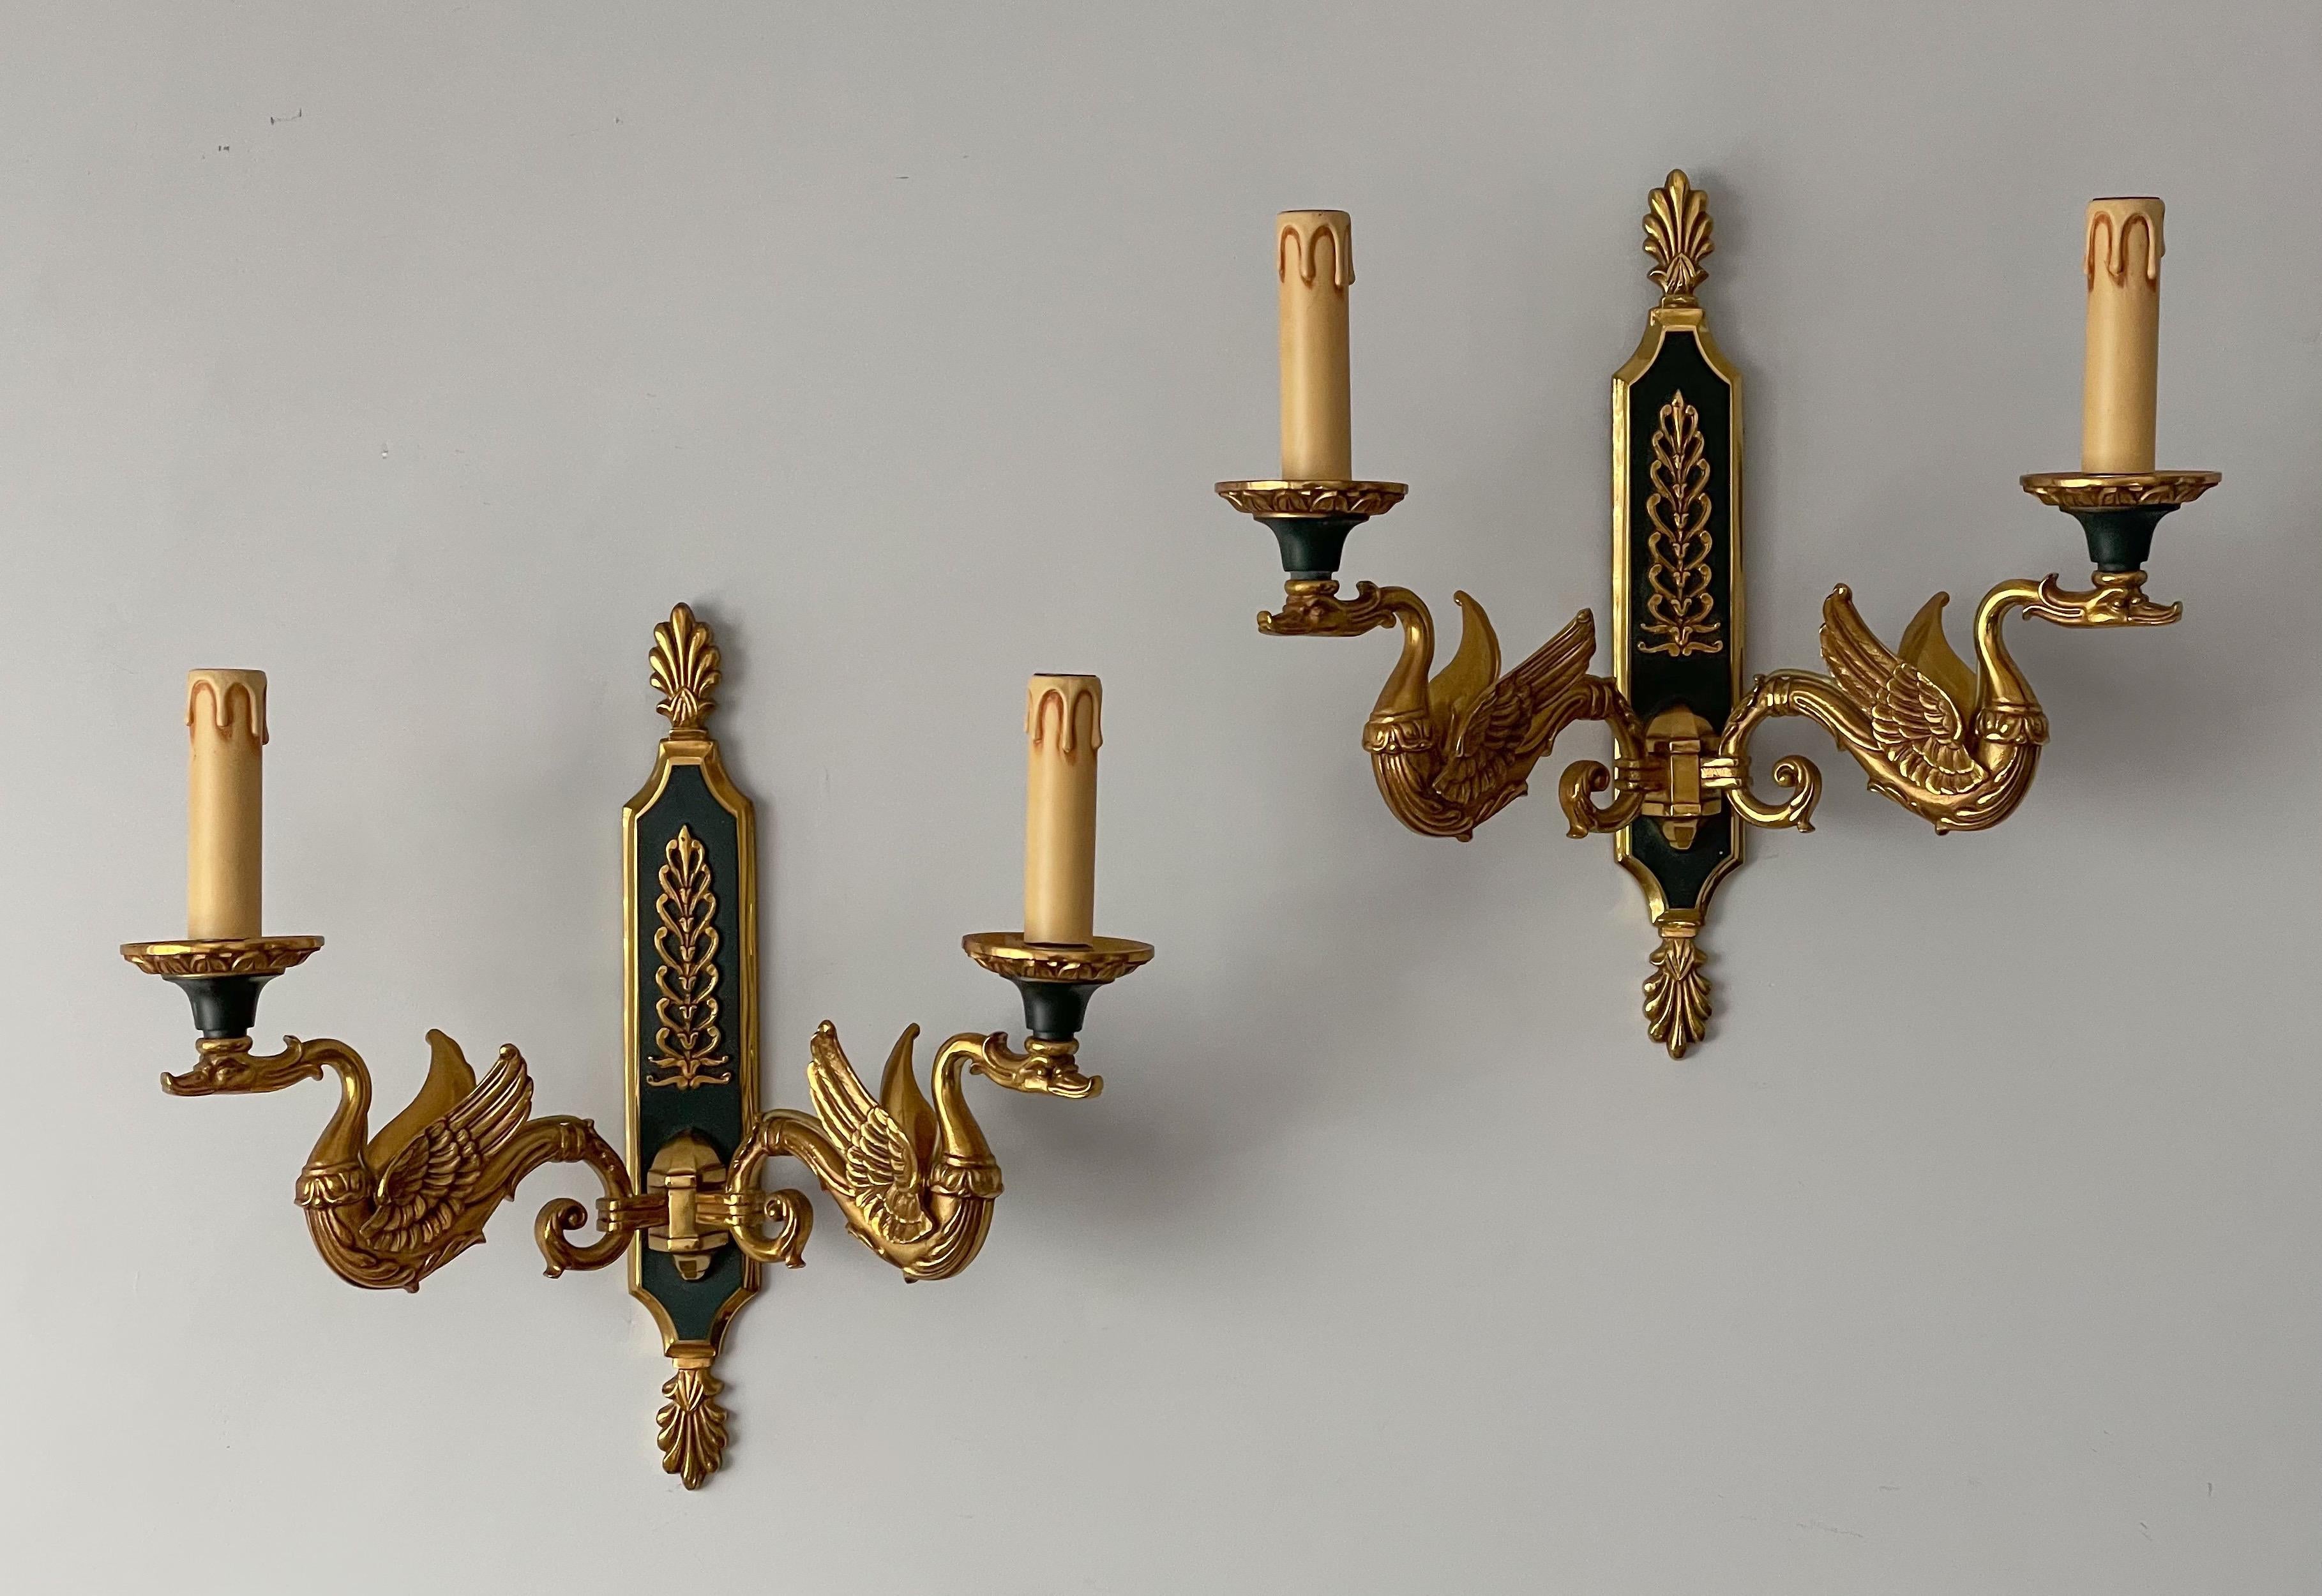 Beautiful, pair of French Empire-style sconces by Maison Lucien Gau, Paris.

The sconces are constructed of solid bronze with a doré and imperial green finish. Finely cast ormolu decorations include a swan under each of the candelabra lights. 

The